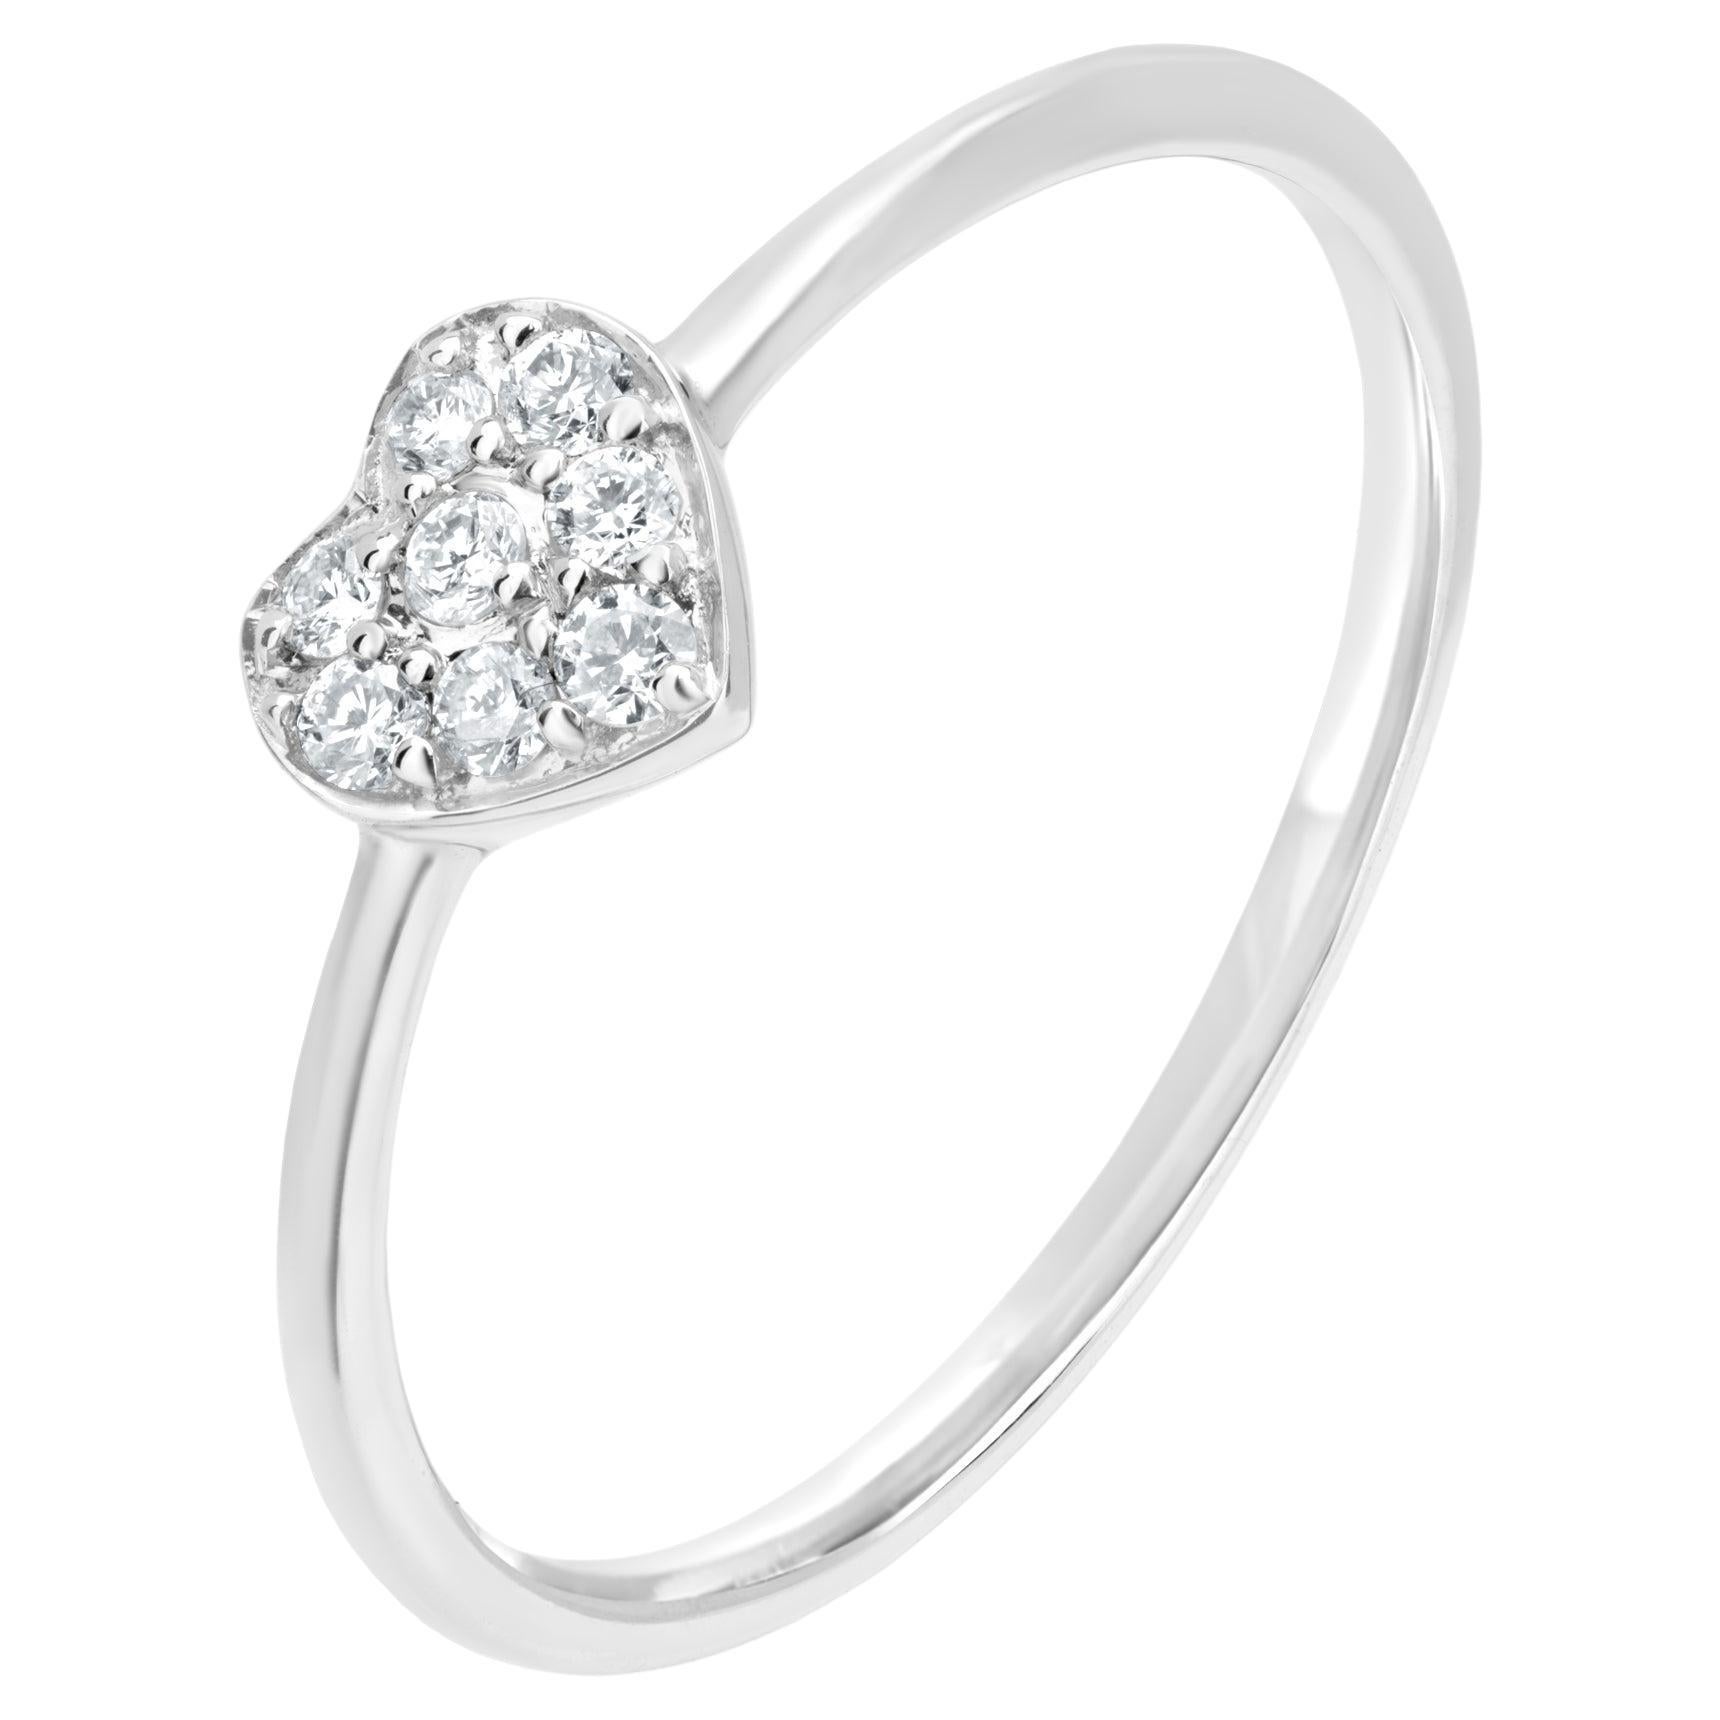 Luxle Round Diamond Heart Shaped Cluster Ring in 18k White Gold For Sale